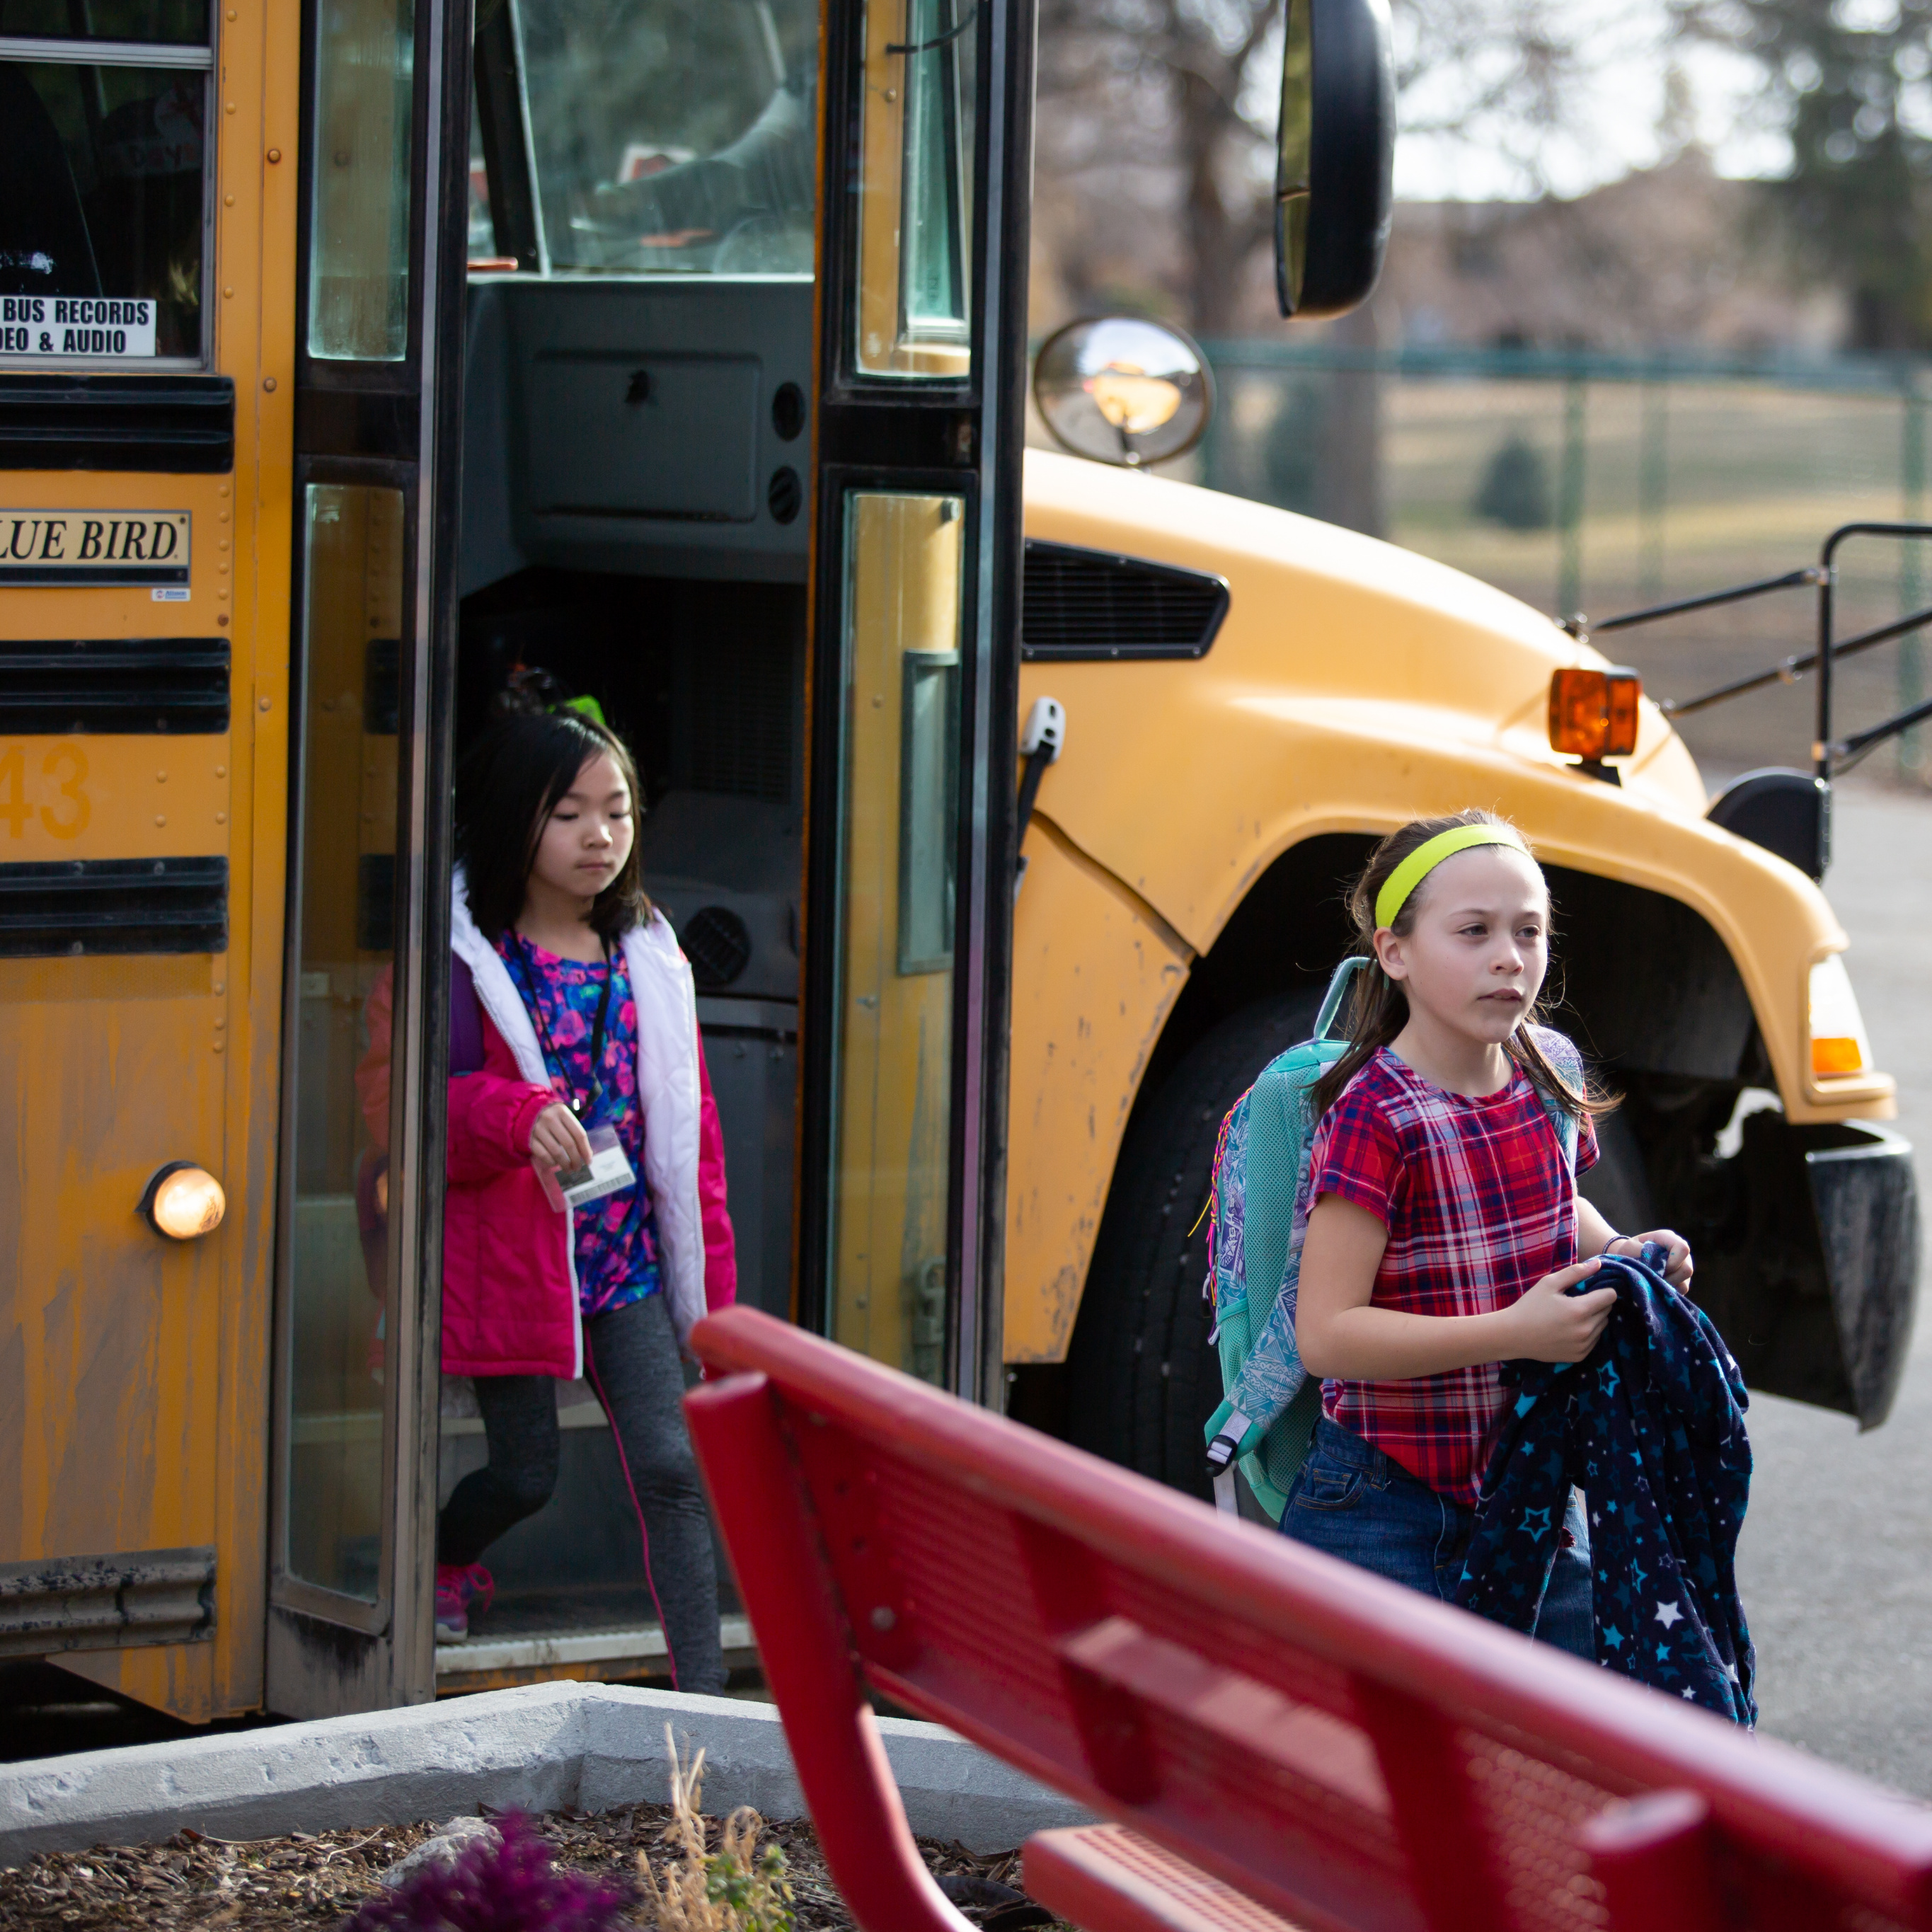 Two young children get off a yellow school bus holding backpacks. 